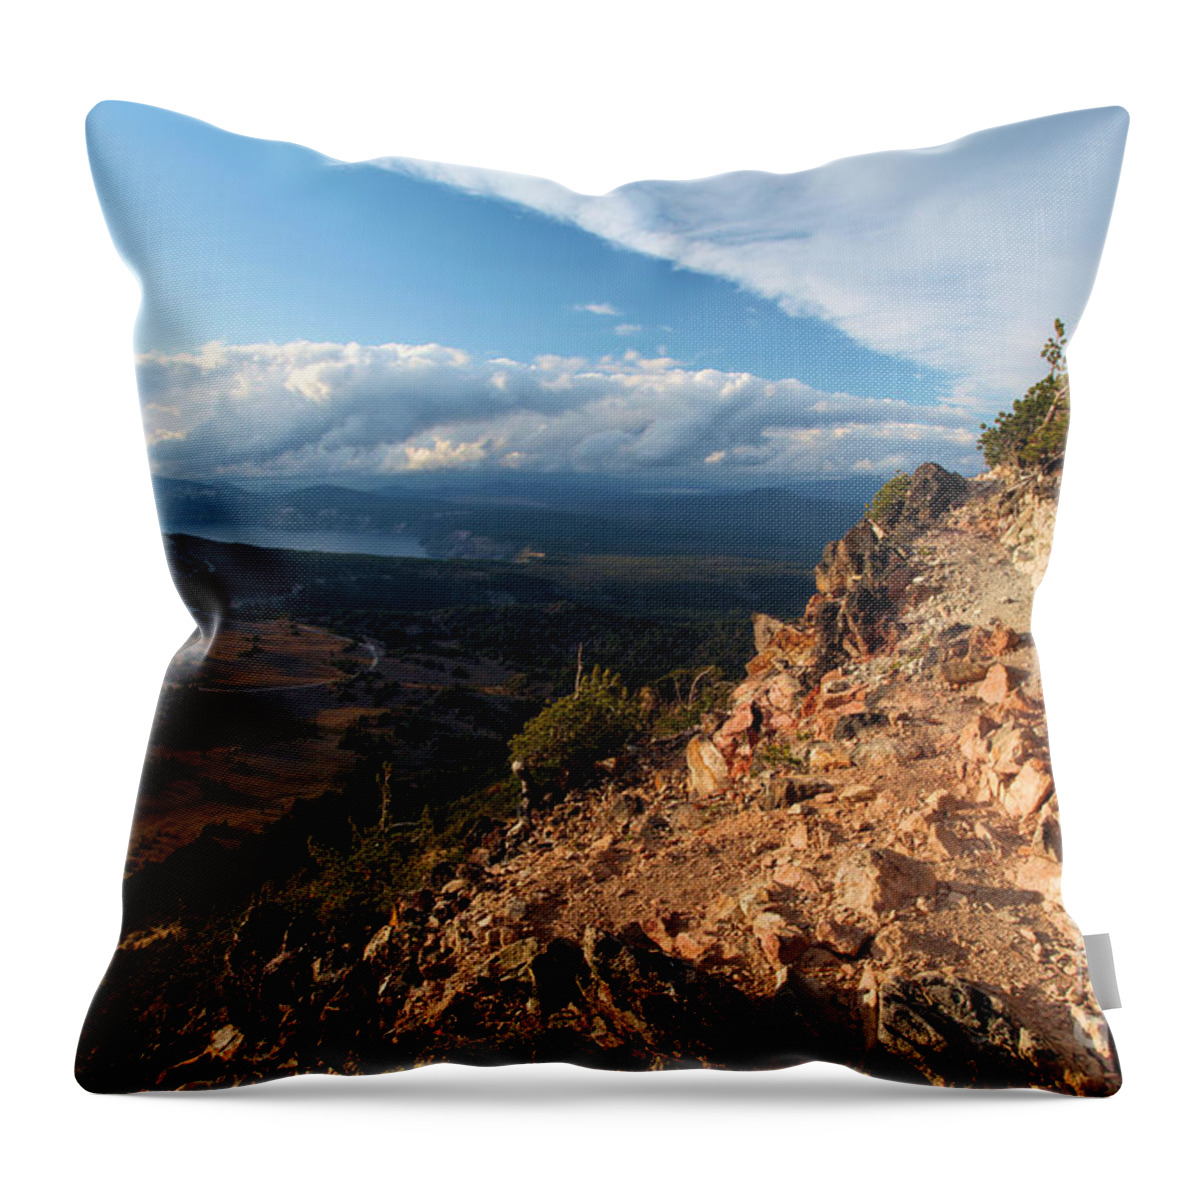 Crater Lake National Park Throw Pillow featuring the photograph Crater Lake Mountains by Adam Jewell